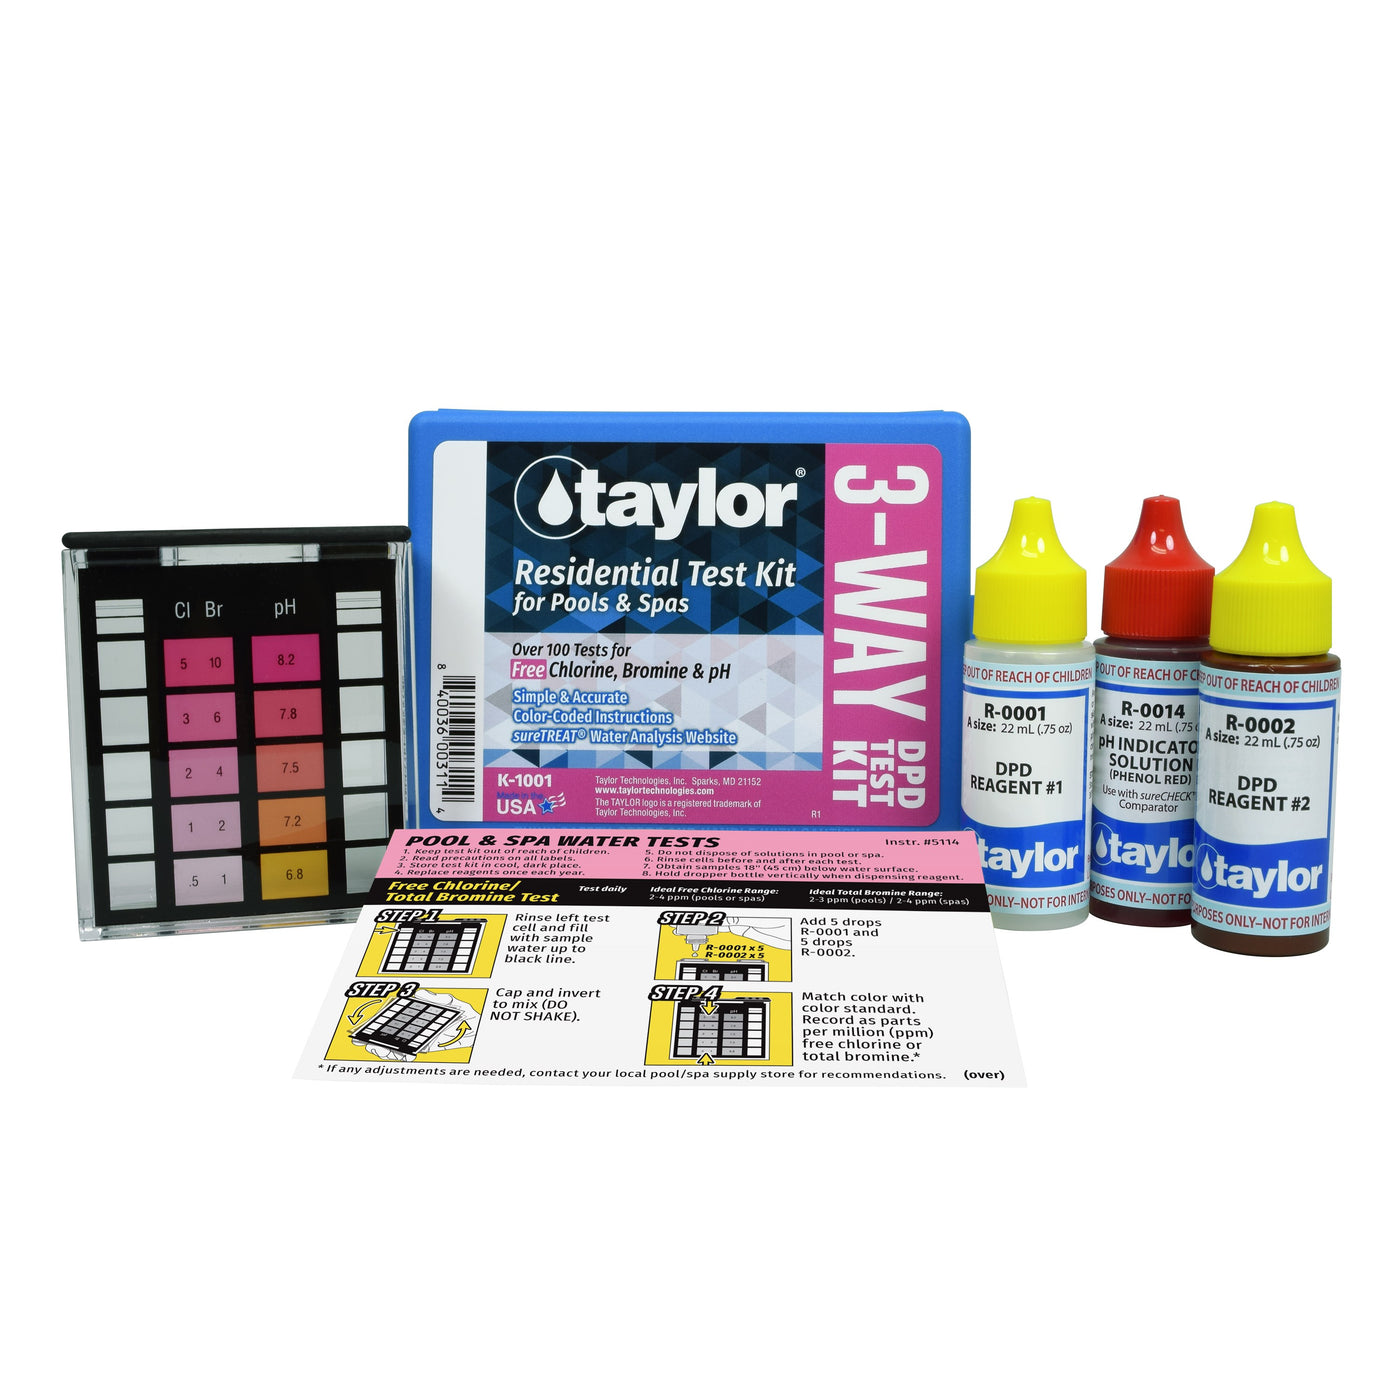 Taylor K-1001 3-Way Test Kit for Free Chlorine, Bromine, pH (DPD)